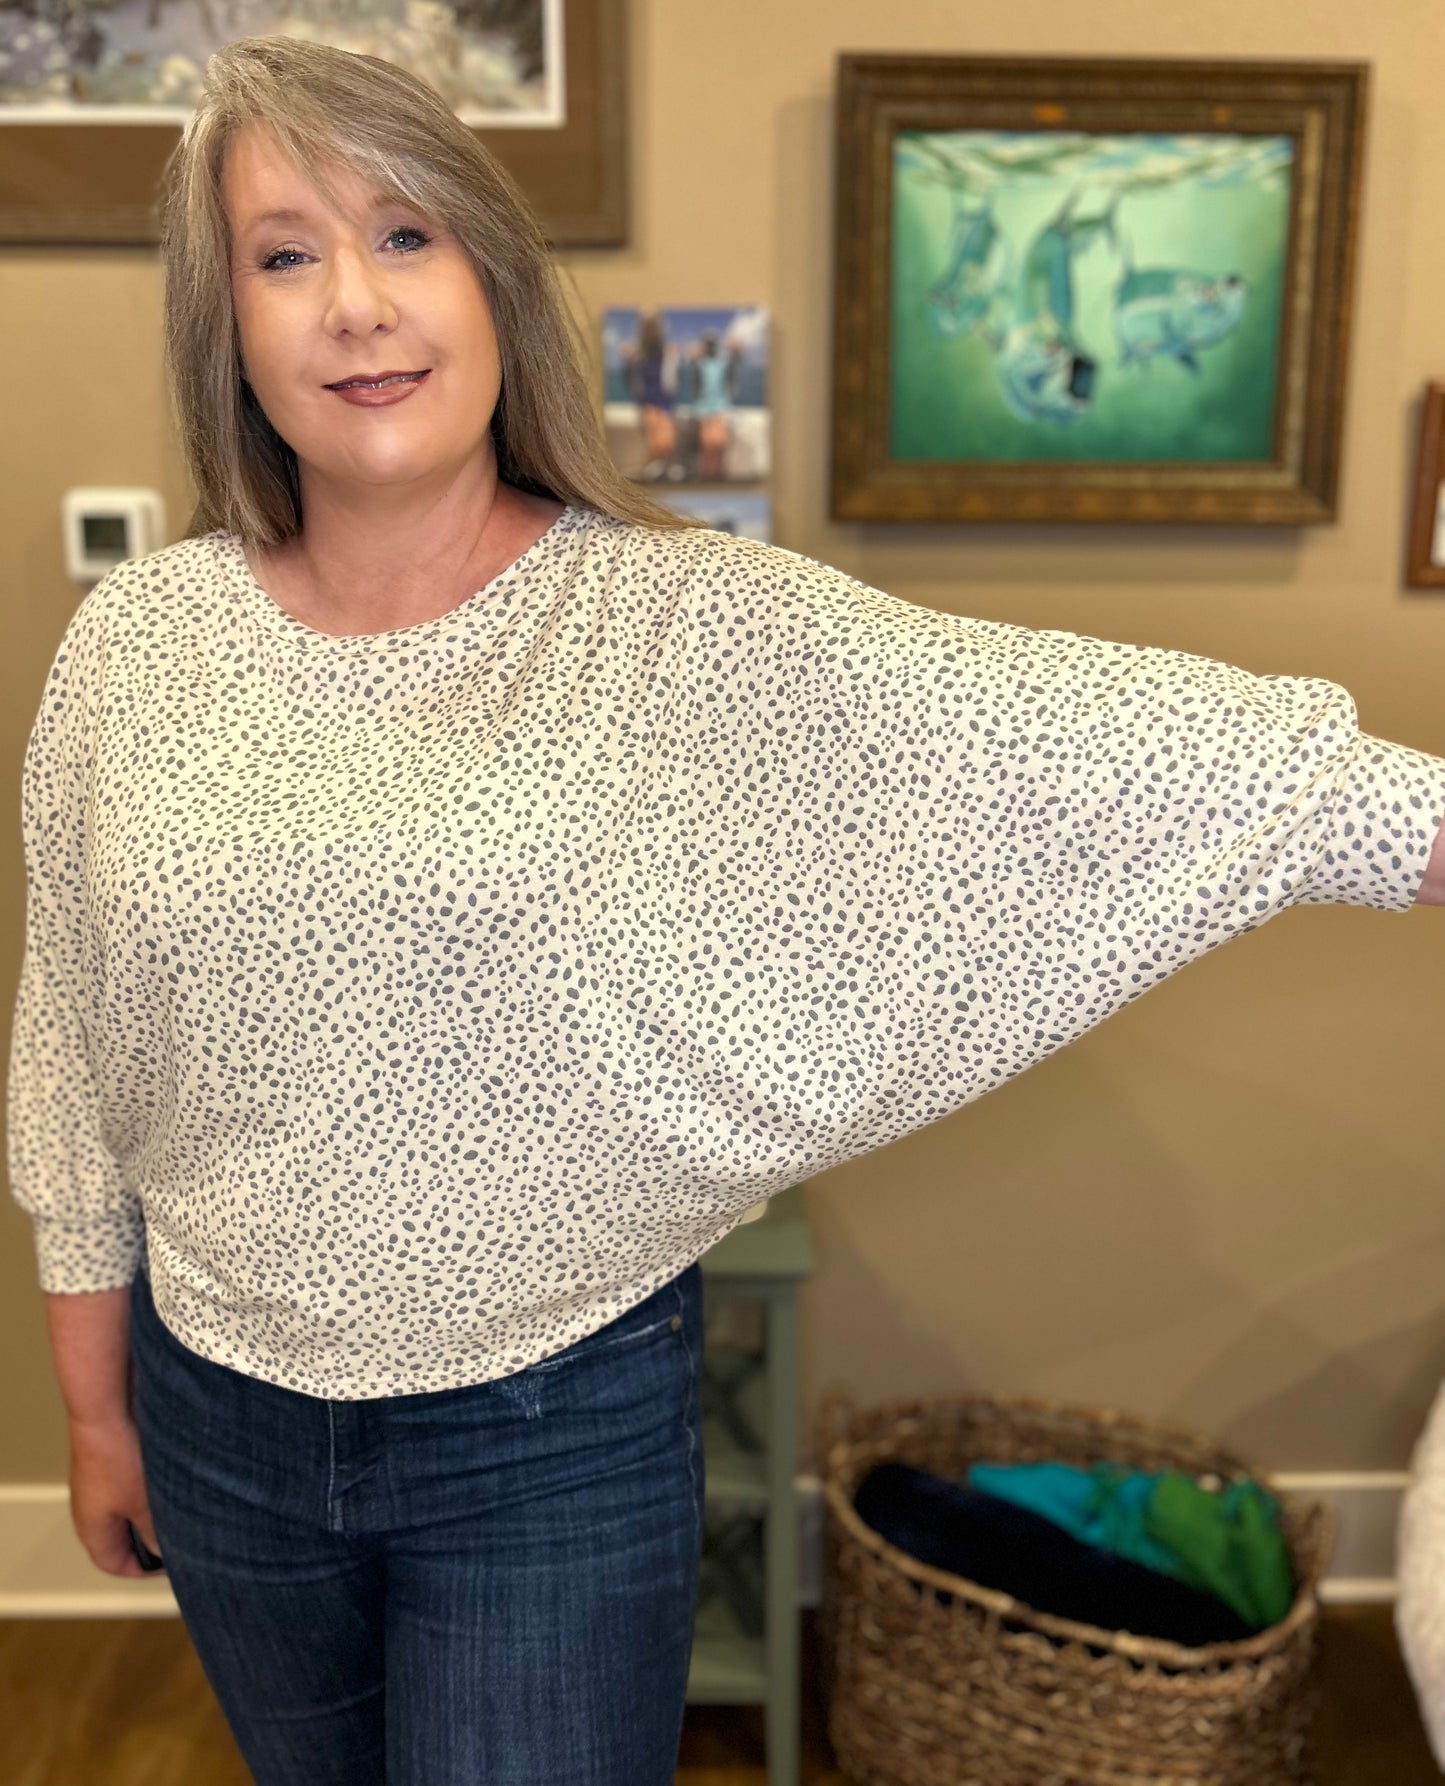 Cheetah Print Sweater - Sweetwater Boutique 